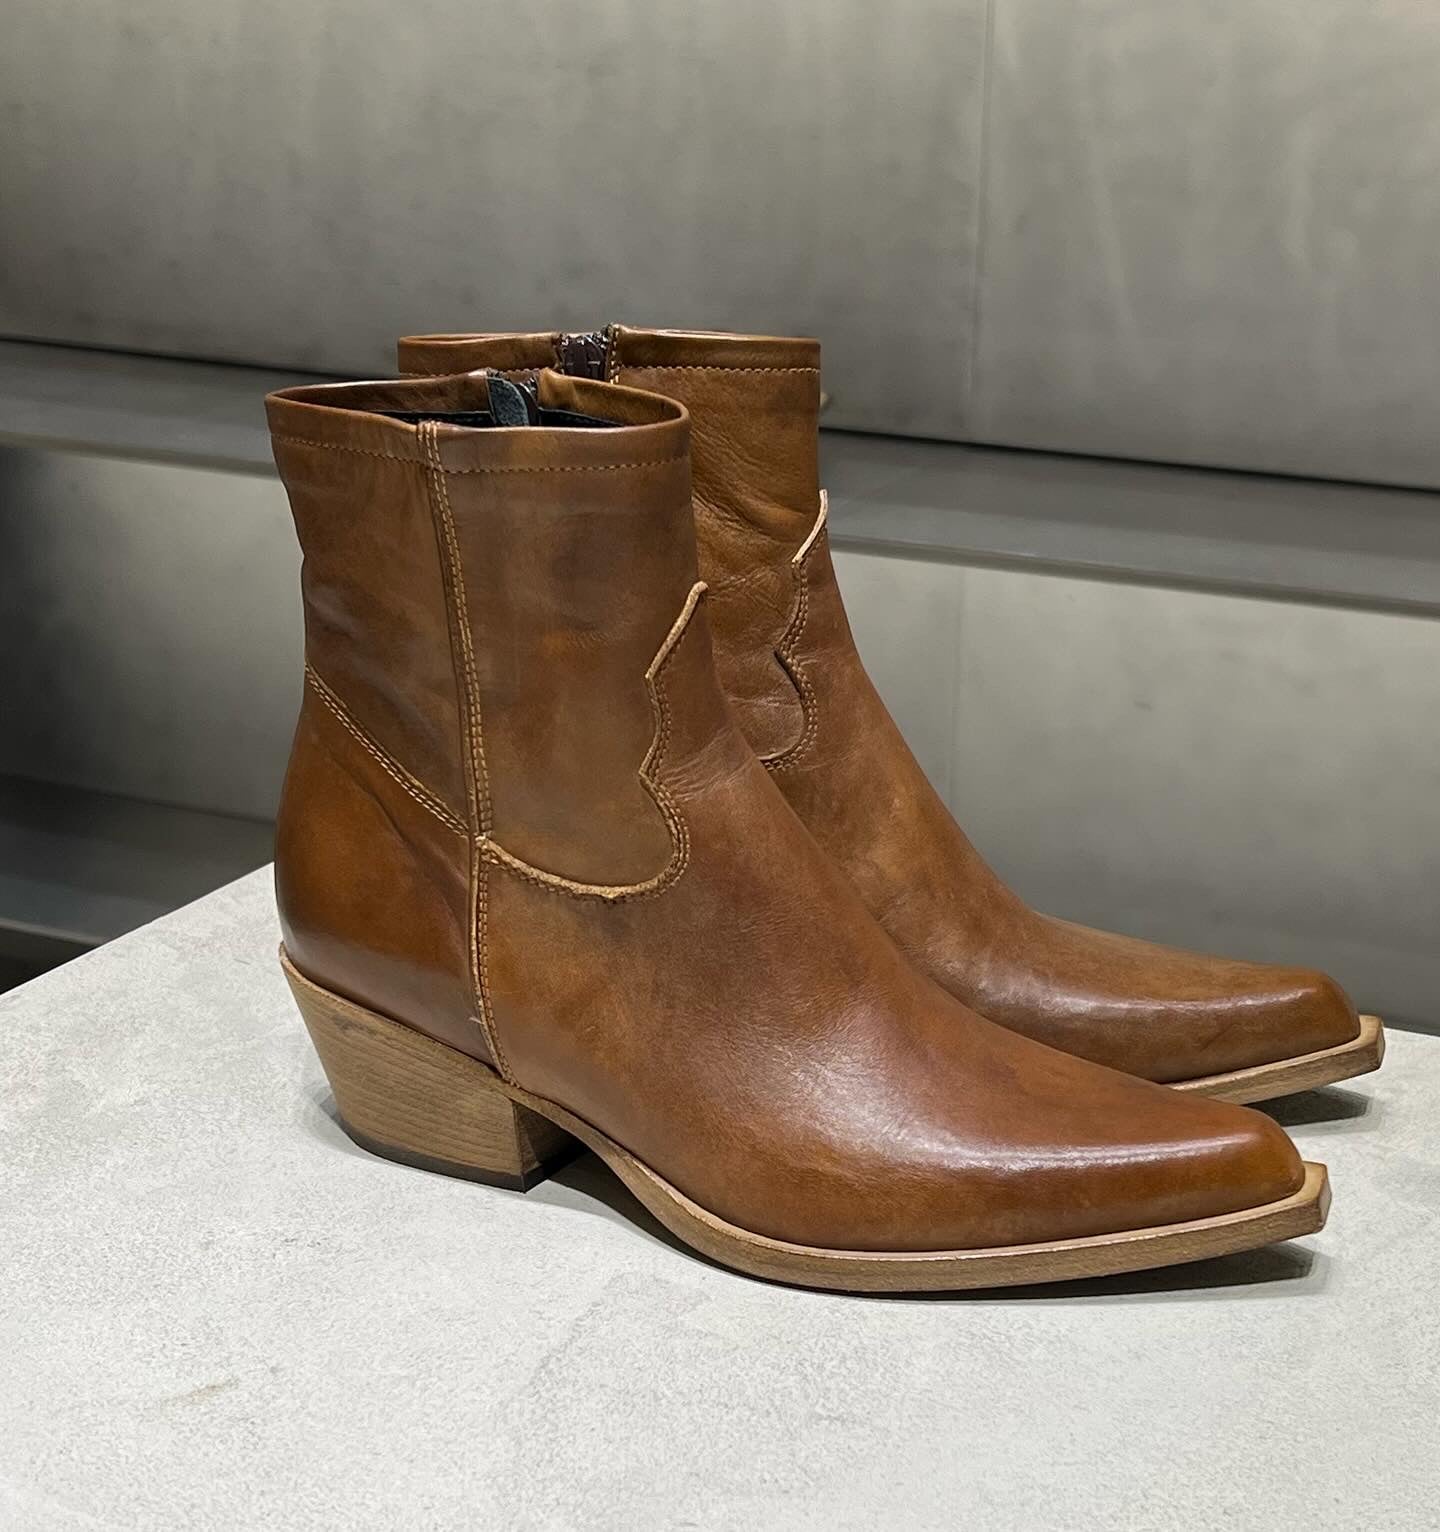 Lucia boots, light brown leather